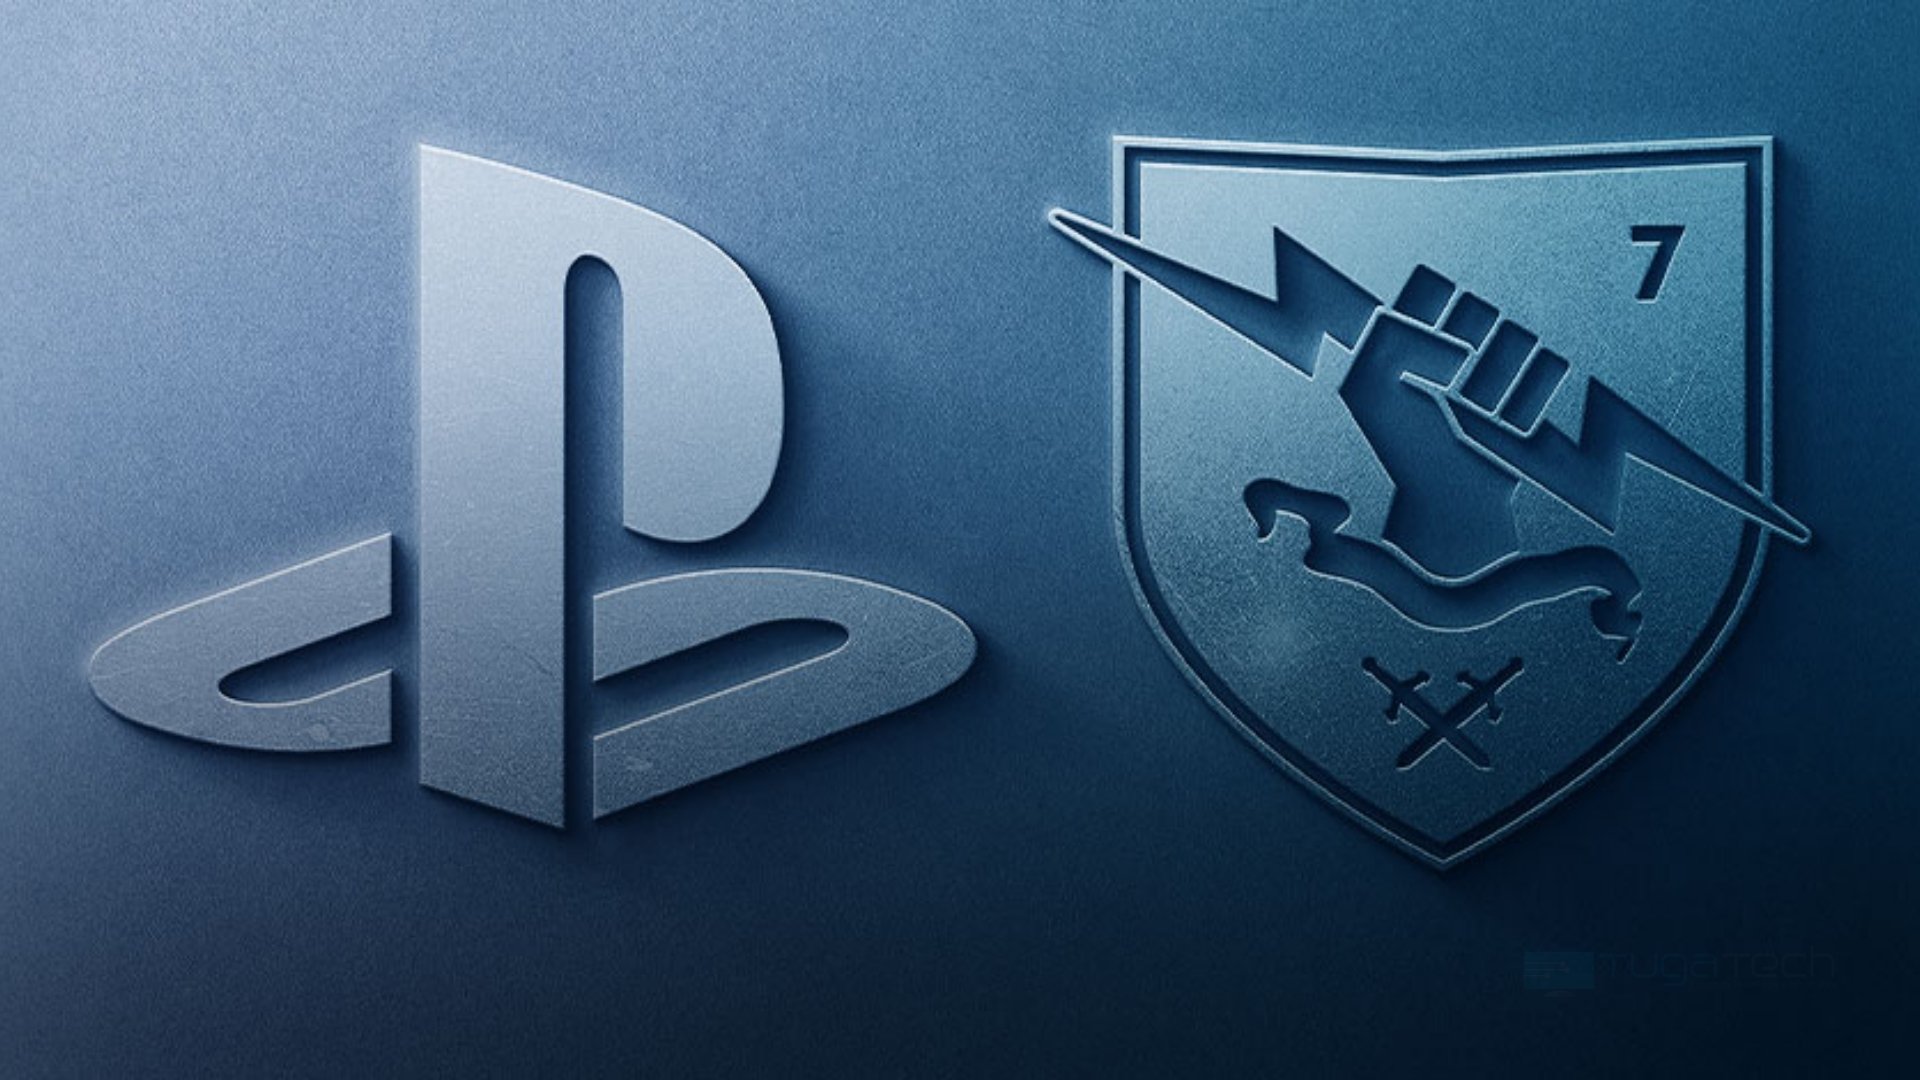 Playstation e Bungie